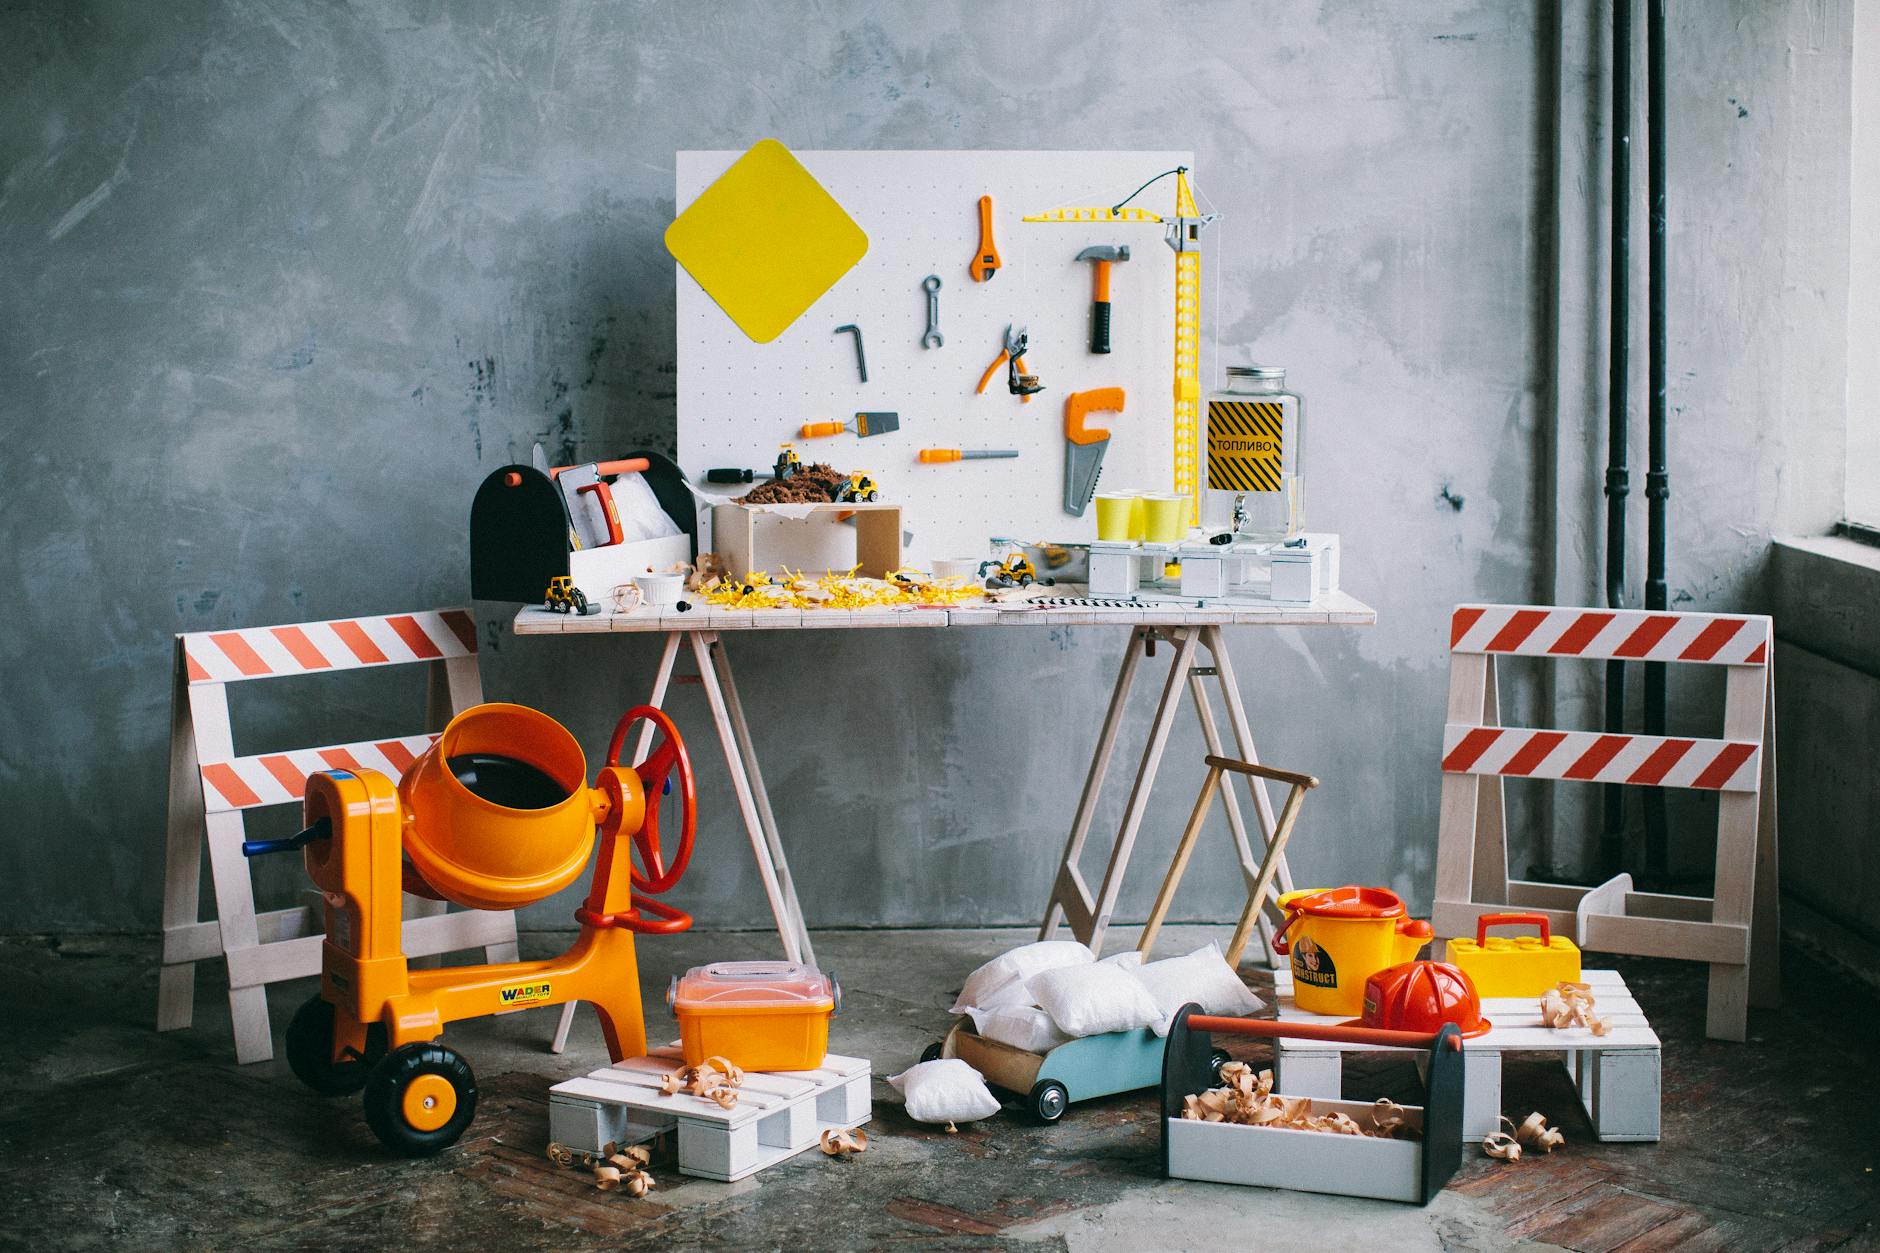 Construction Equipment and Tools Plastic Toys